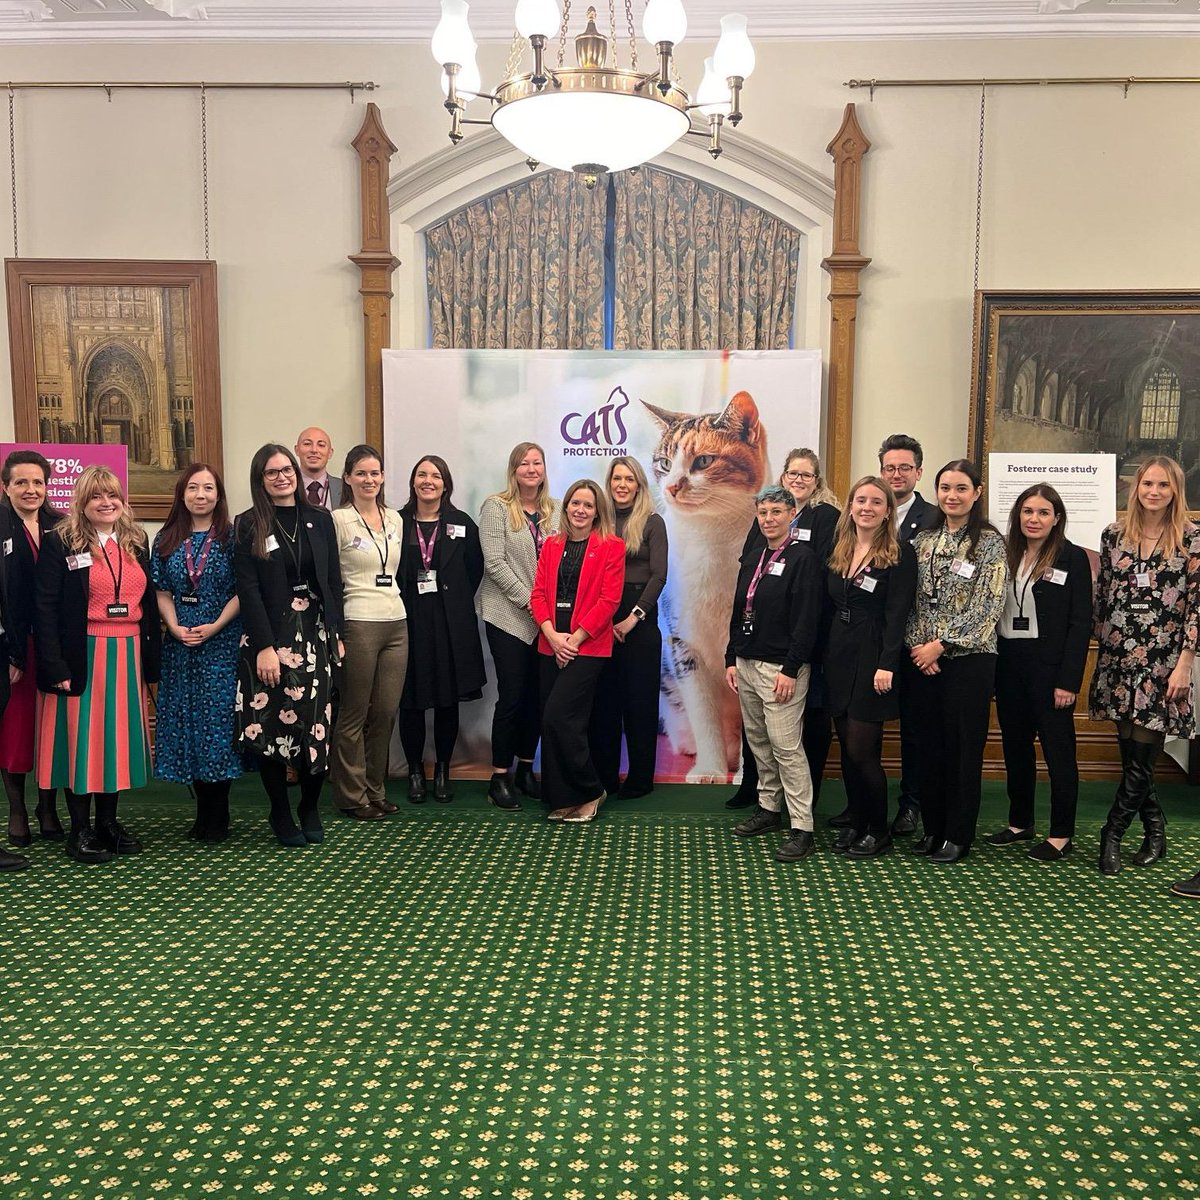 Today we are in Parliament hosting an important event to talk to MPs about our Lifeline service. Lifeline cat fostering service provides a temporary loving home for cats whose families are fleeing domestic abuse. Find out more at cats.org.uk/together 🐾